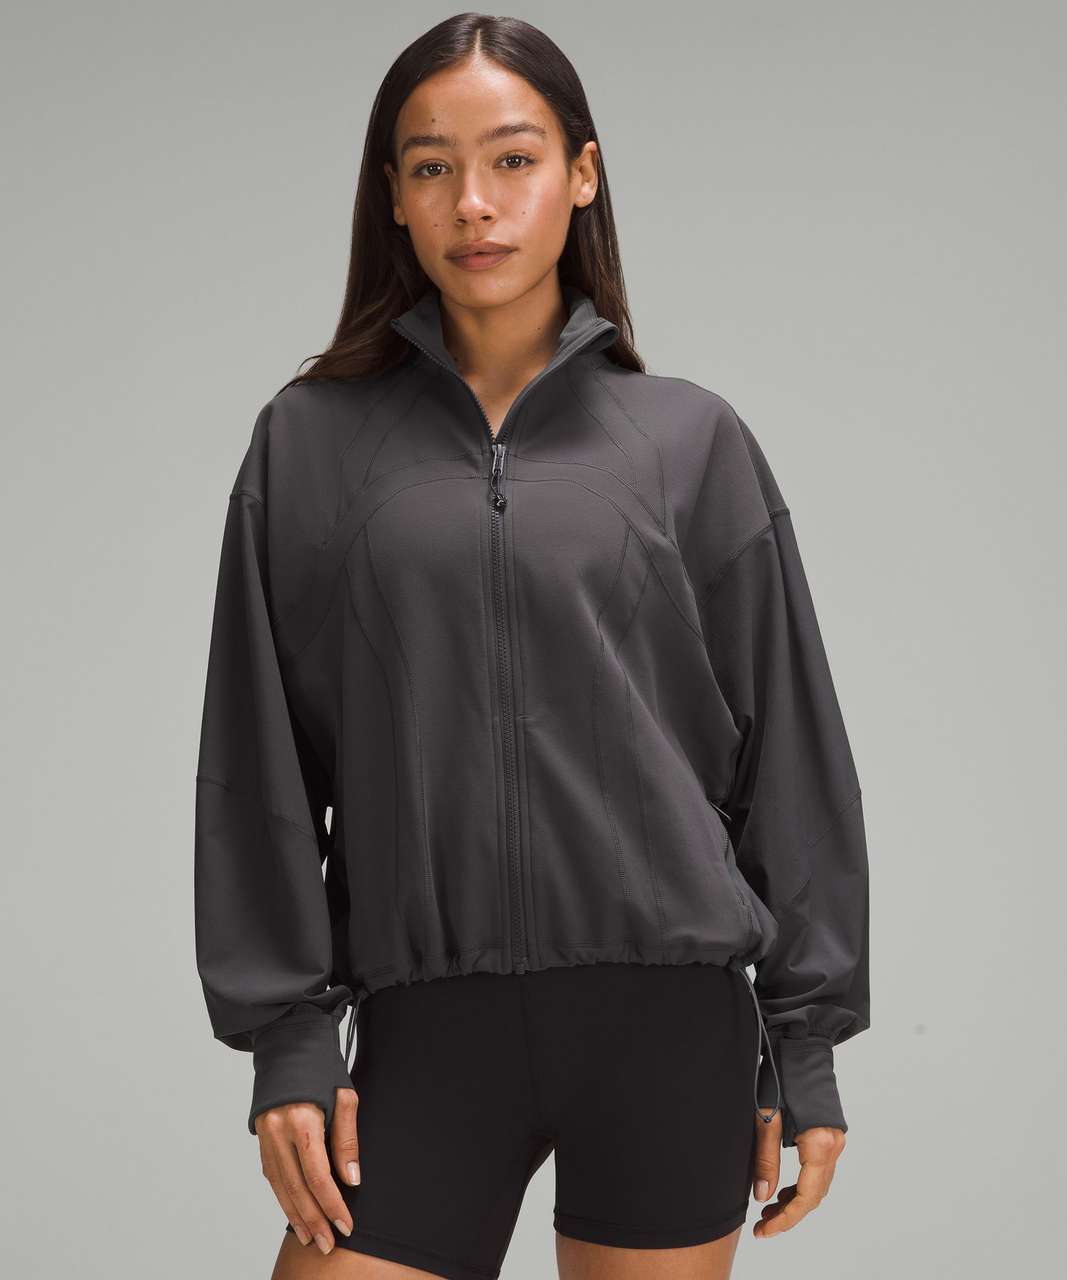 Lululemon Define Relaxed-Fit Jacket *Luon - Graphite Grey